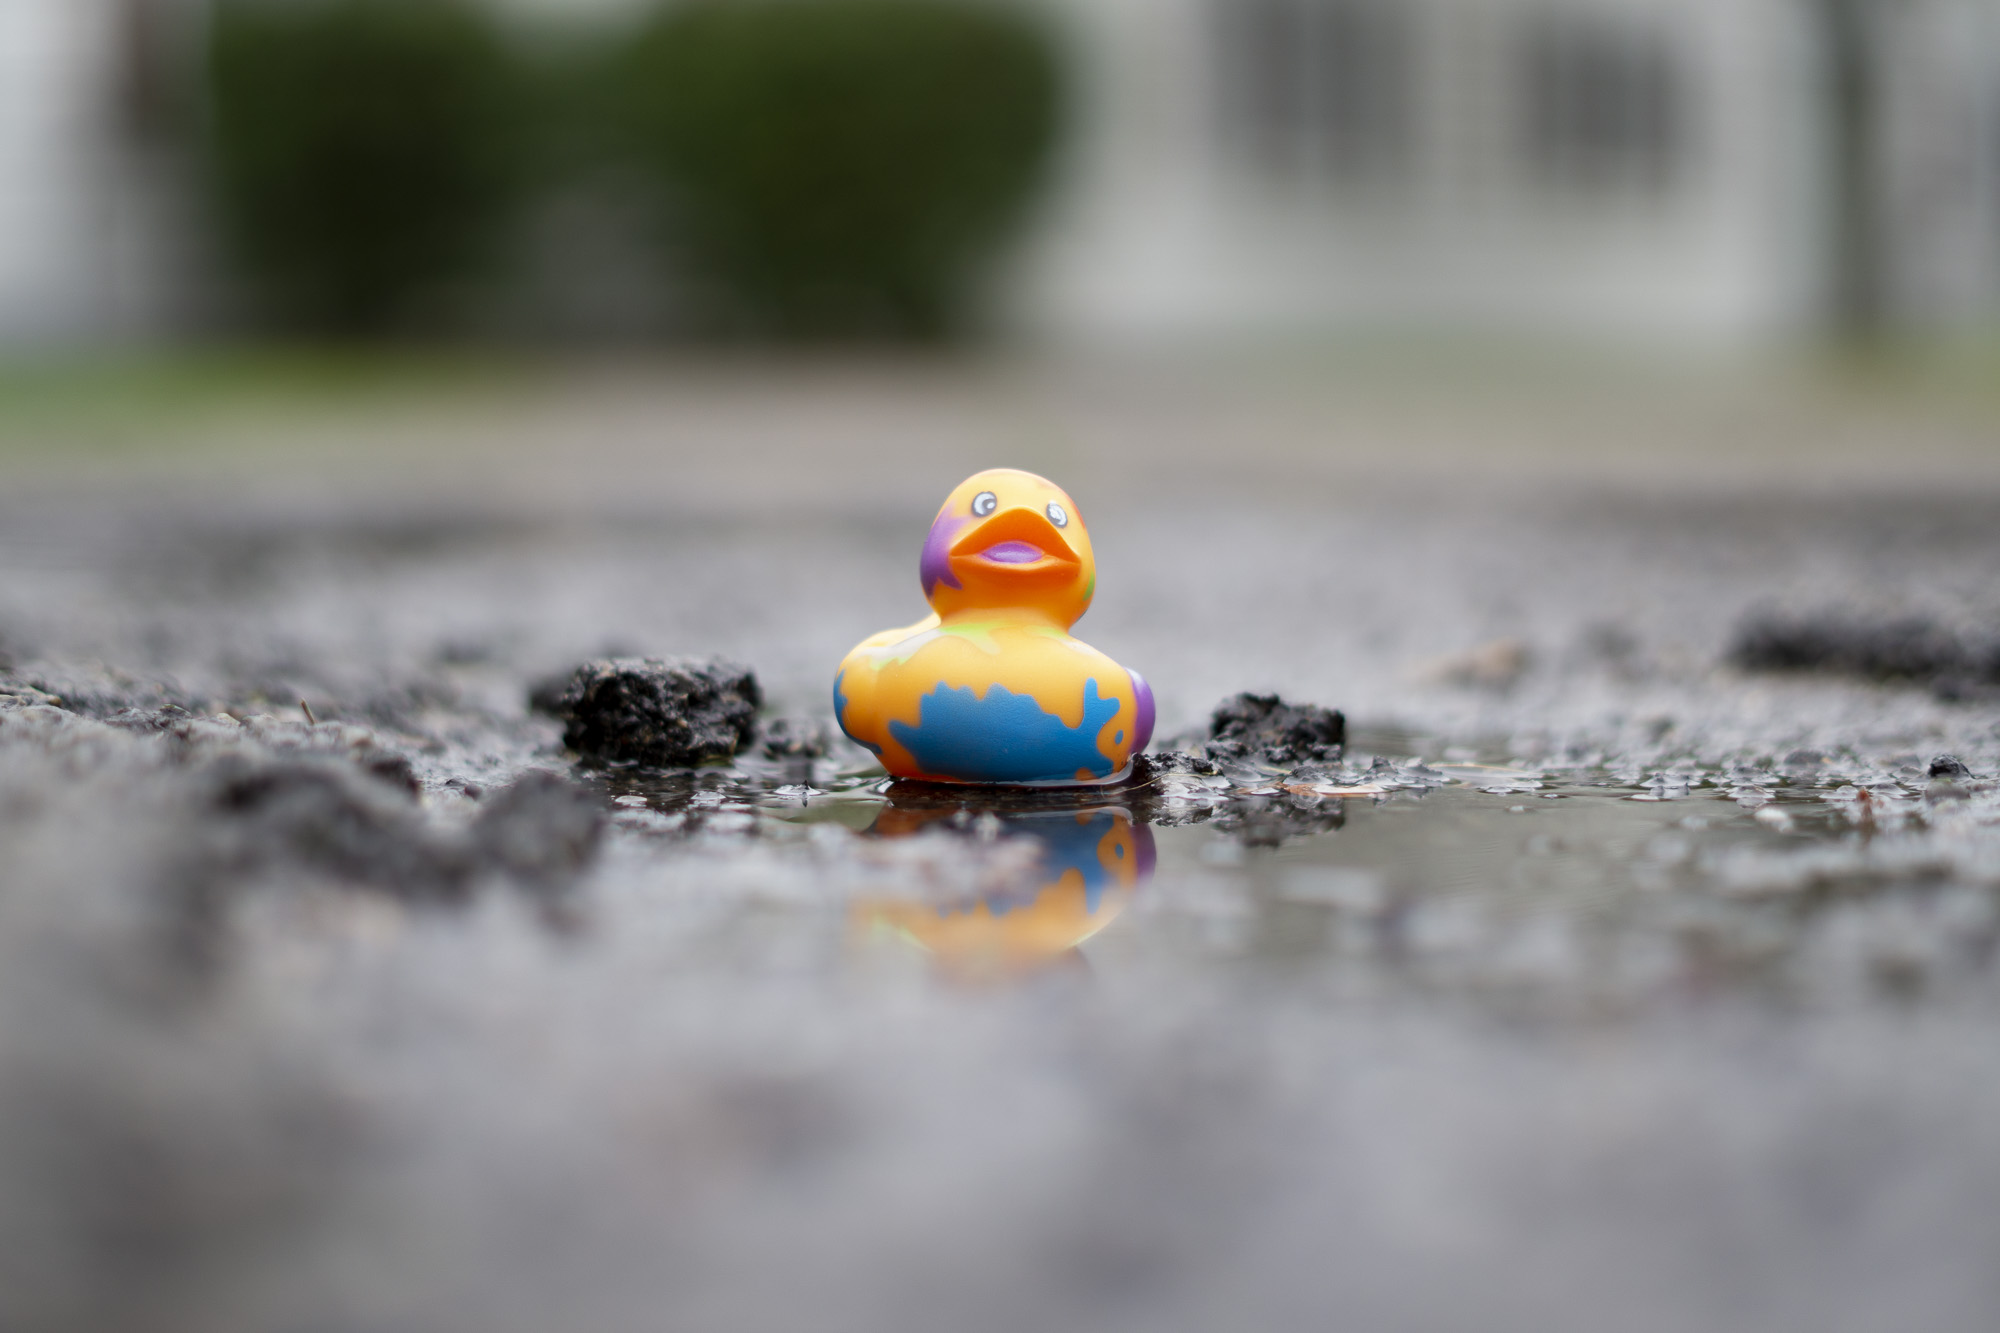 Rubber duck in puddle